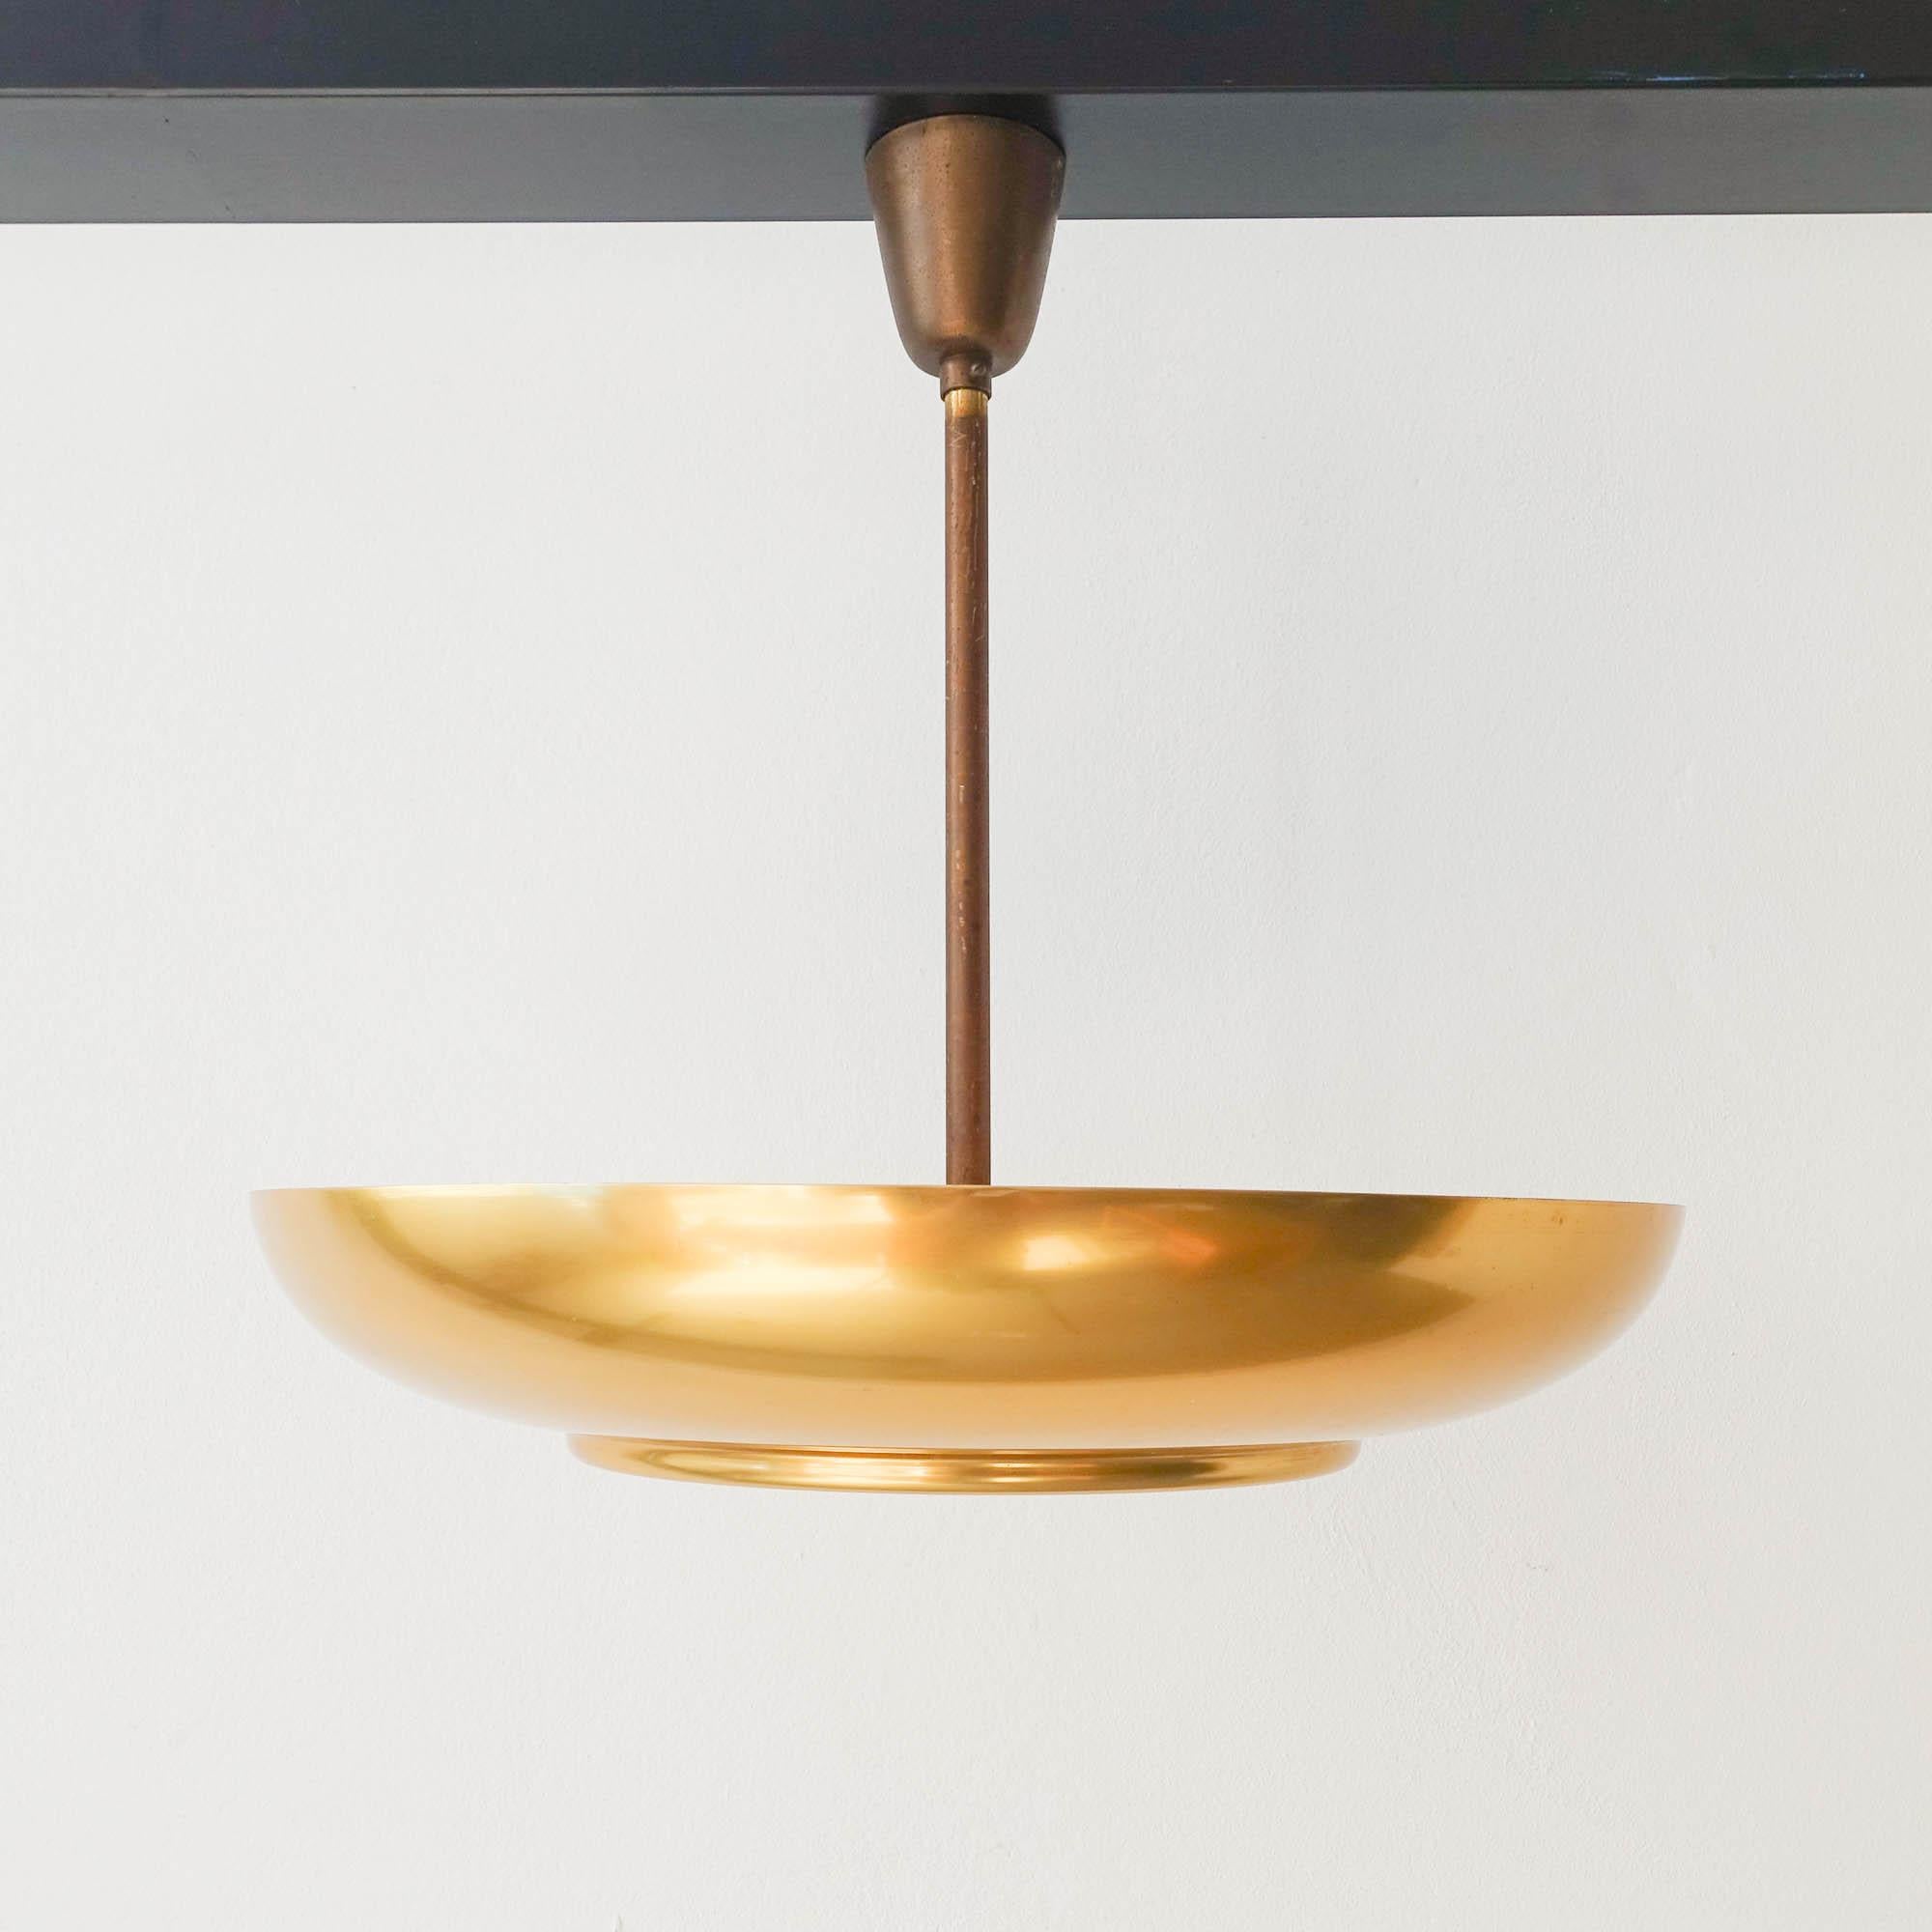 A very rare large and impressive ceiling light designed by Christian Dell for Kaiser Idell. The lamp is made of brass and etched bevelled glass. Painted off-white internally. The light can be projected on the ceiling and because of the glass it also